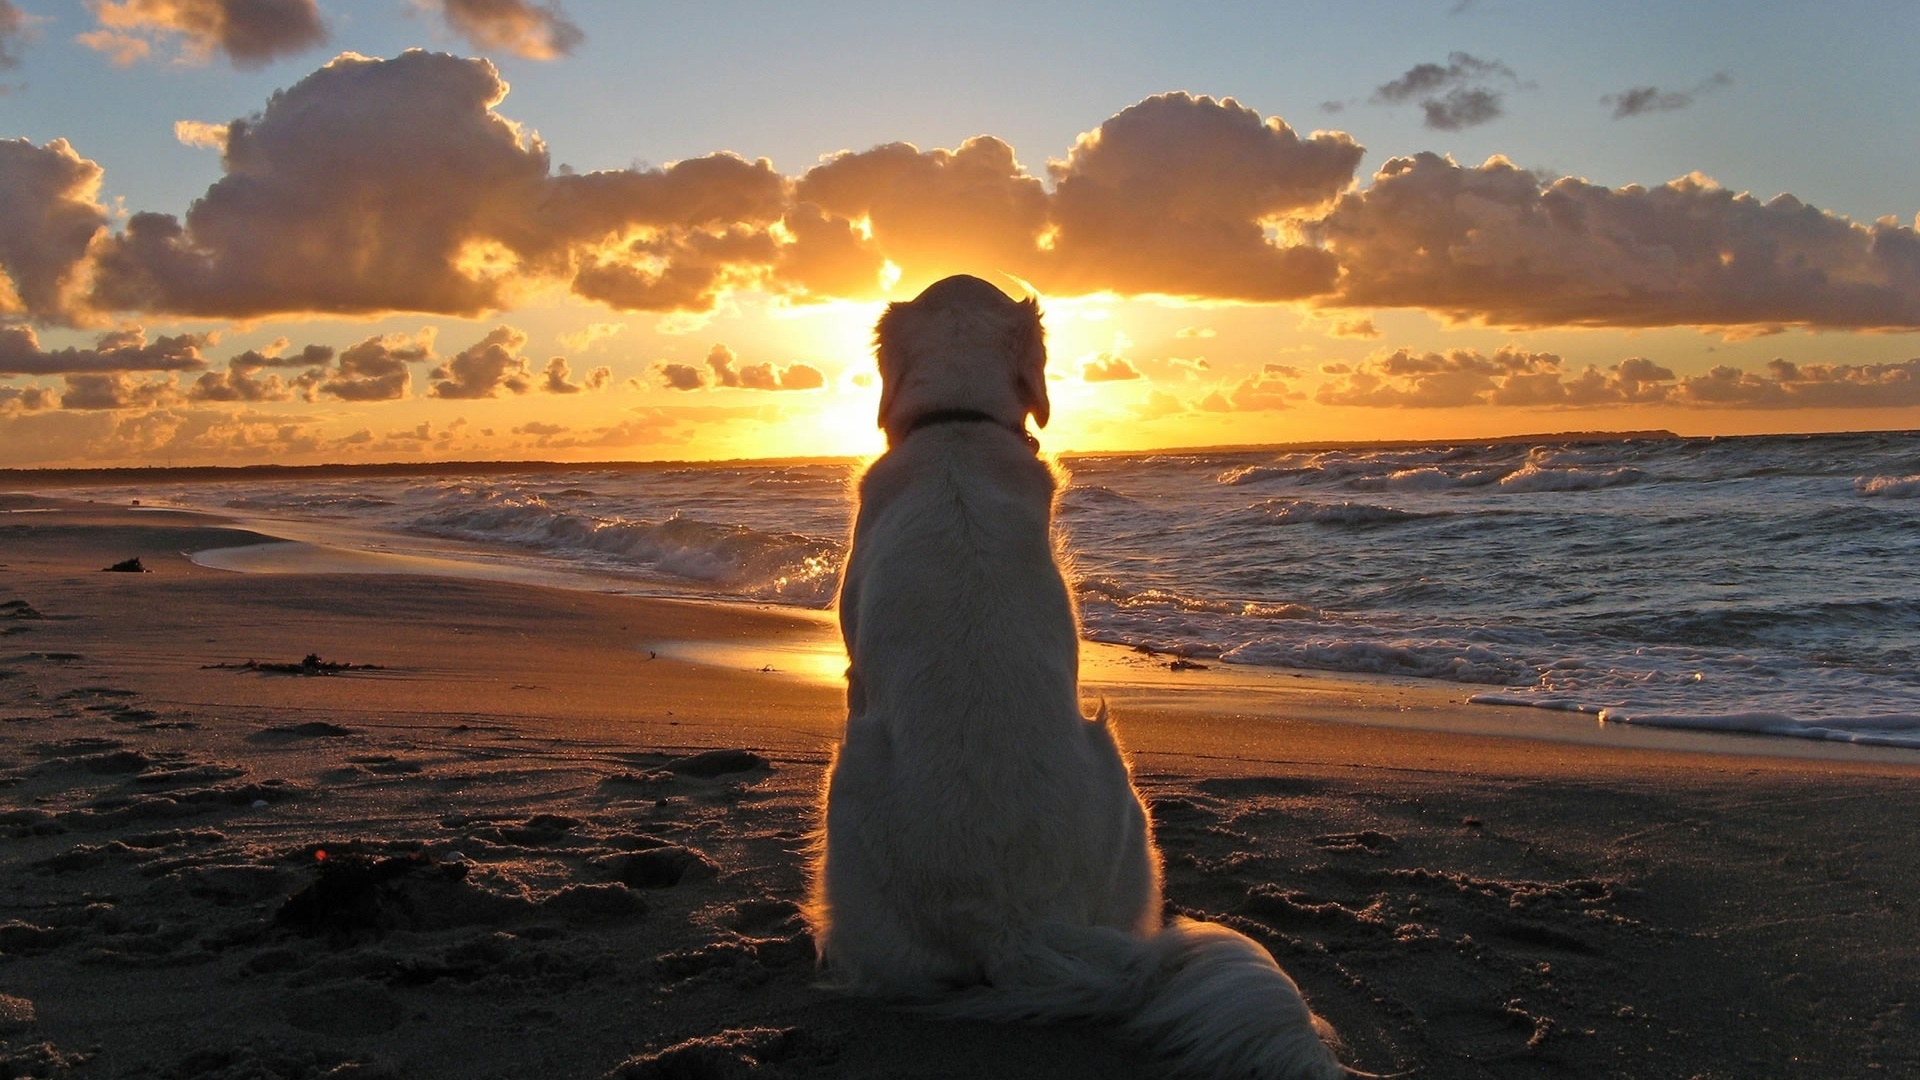 Sunset with Dog for 1920 x 1080 HDTV 1080p resolution